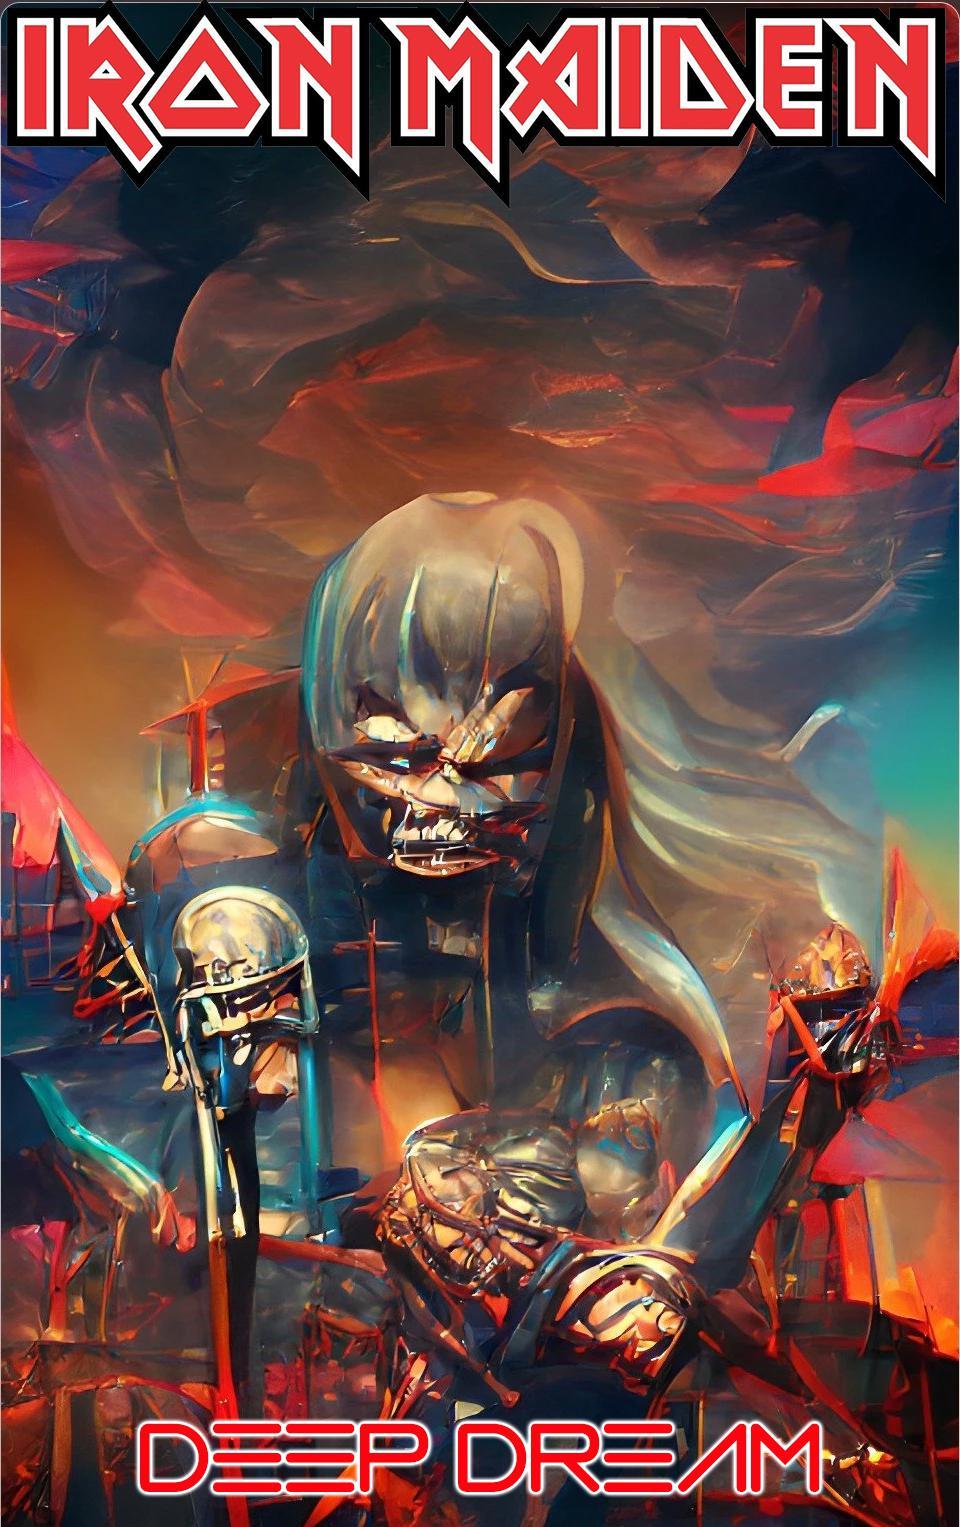 I Entered Iron Maiden Into A Deep Dream Image Generator And